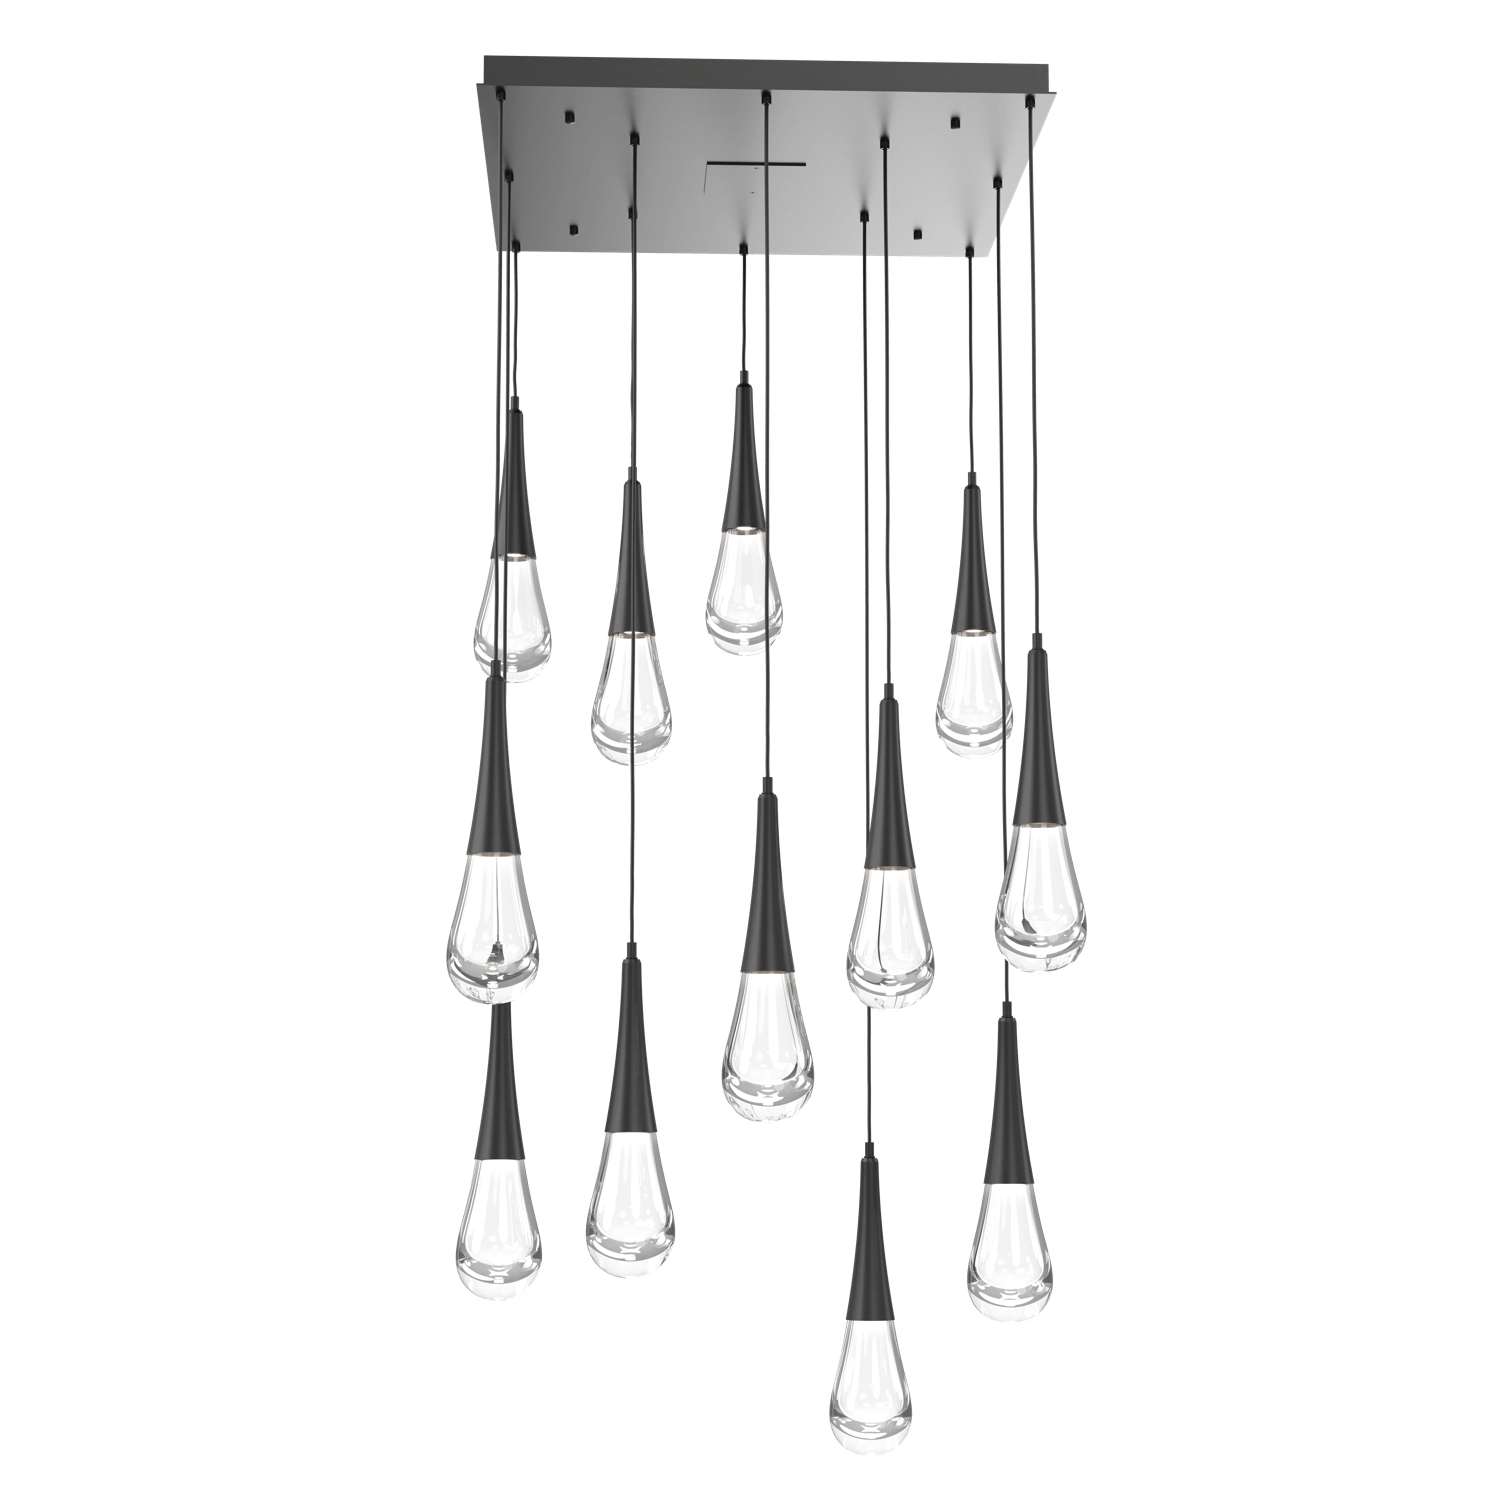 CHB0078-12-MB-Hammerton-Studio-Raindrop-12-light-square-pendant-chandelier-with-matte-black-finish-and-clear-blown-glass-shades-and-LED-lamping